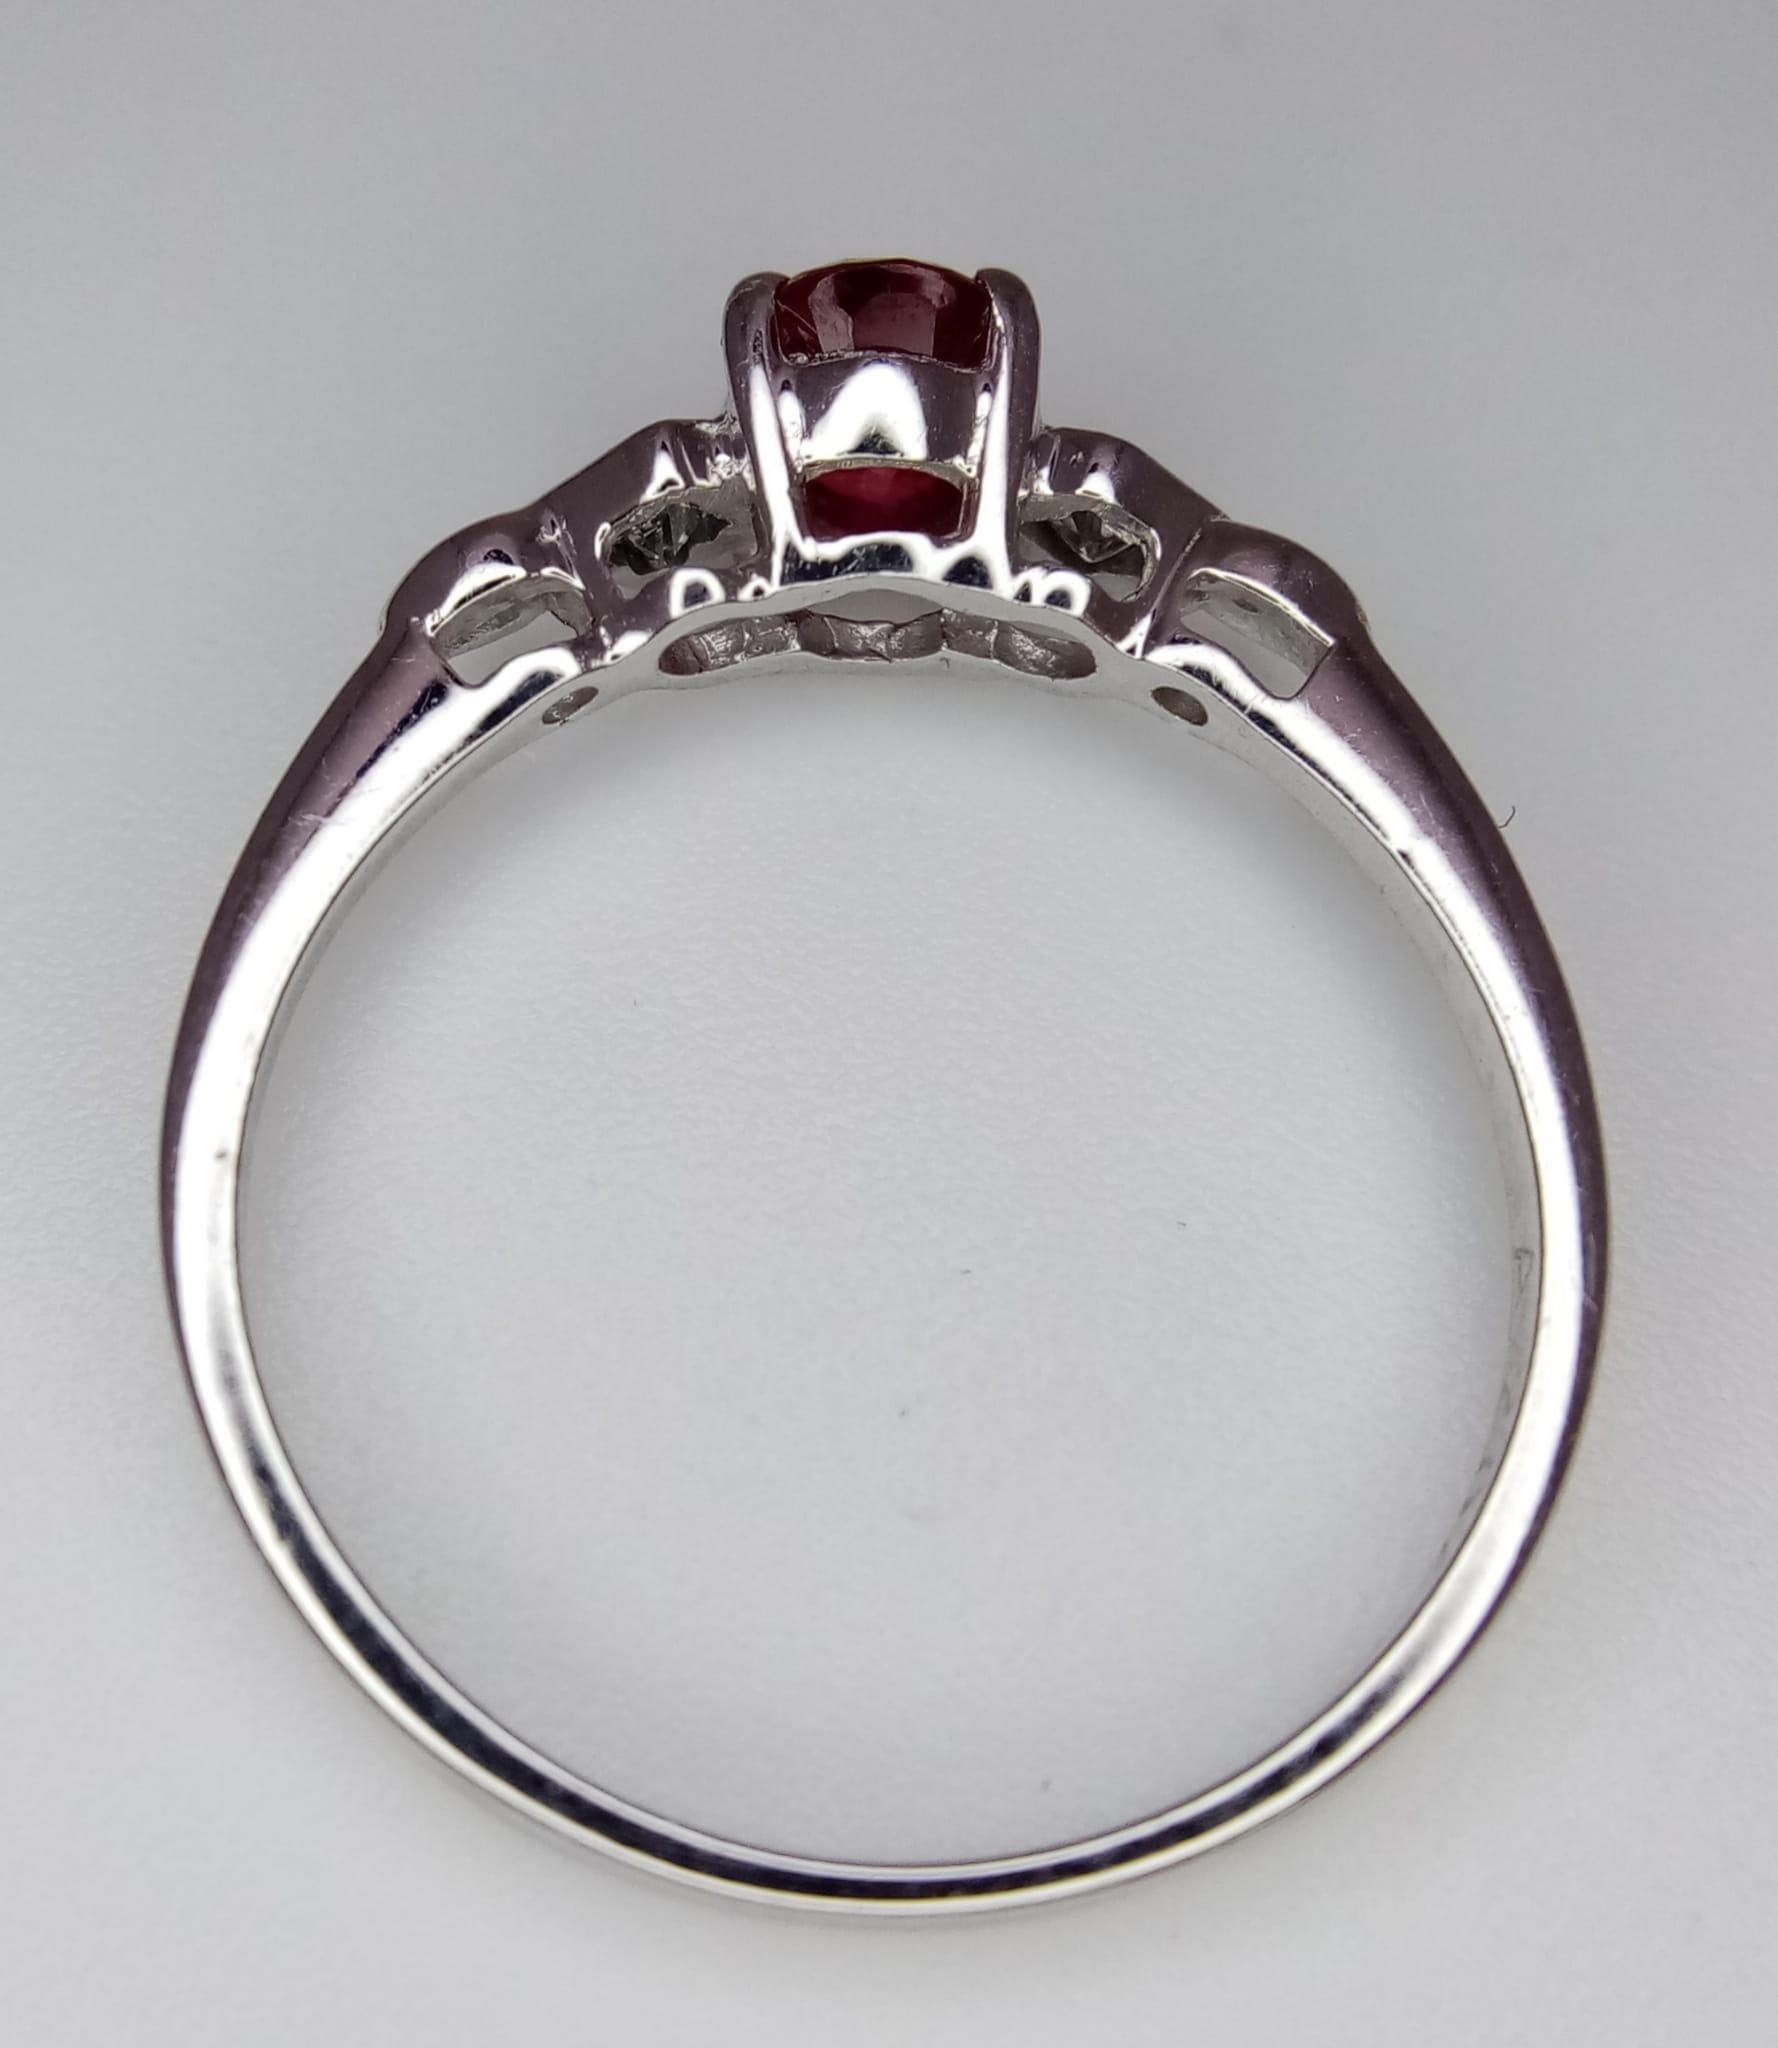 18K WHITE GOLD DIAMOND & RUBY RING. SIZE N. WEIGHT: 2G - Image 3 of 4